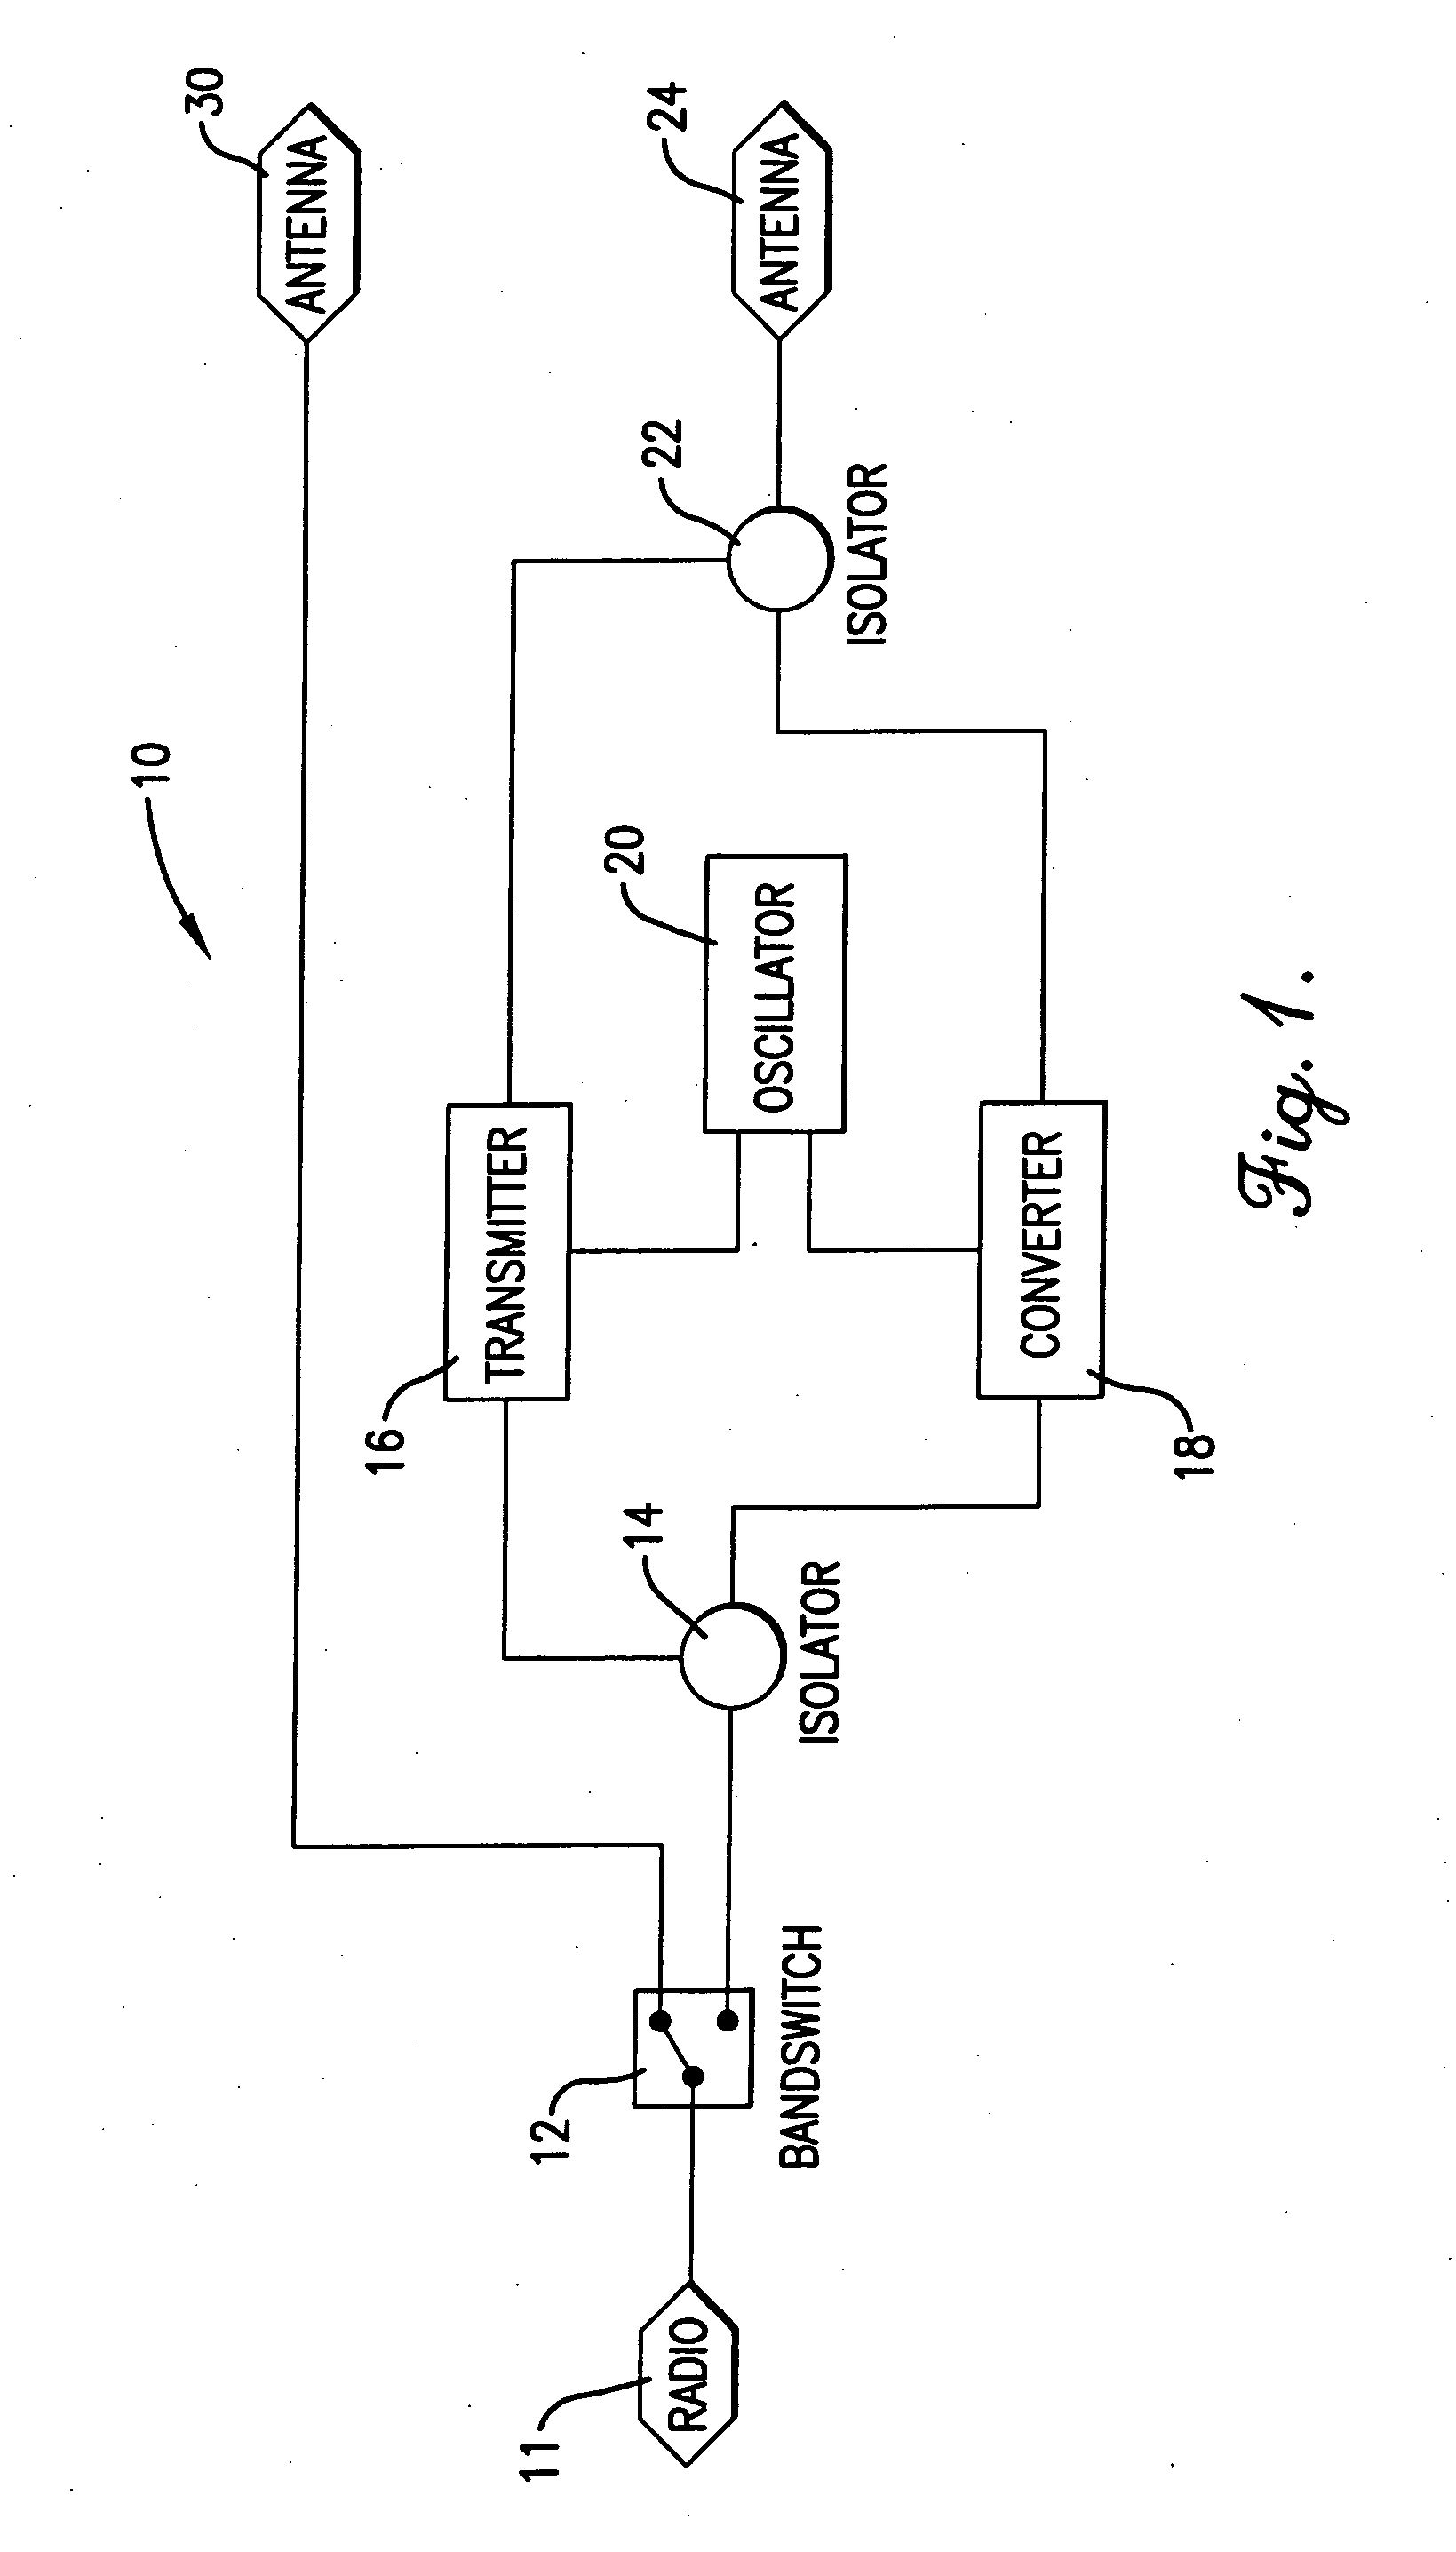 ISM band to U-NII band frequency transverter and method of frequency transversion